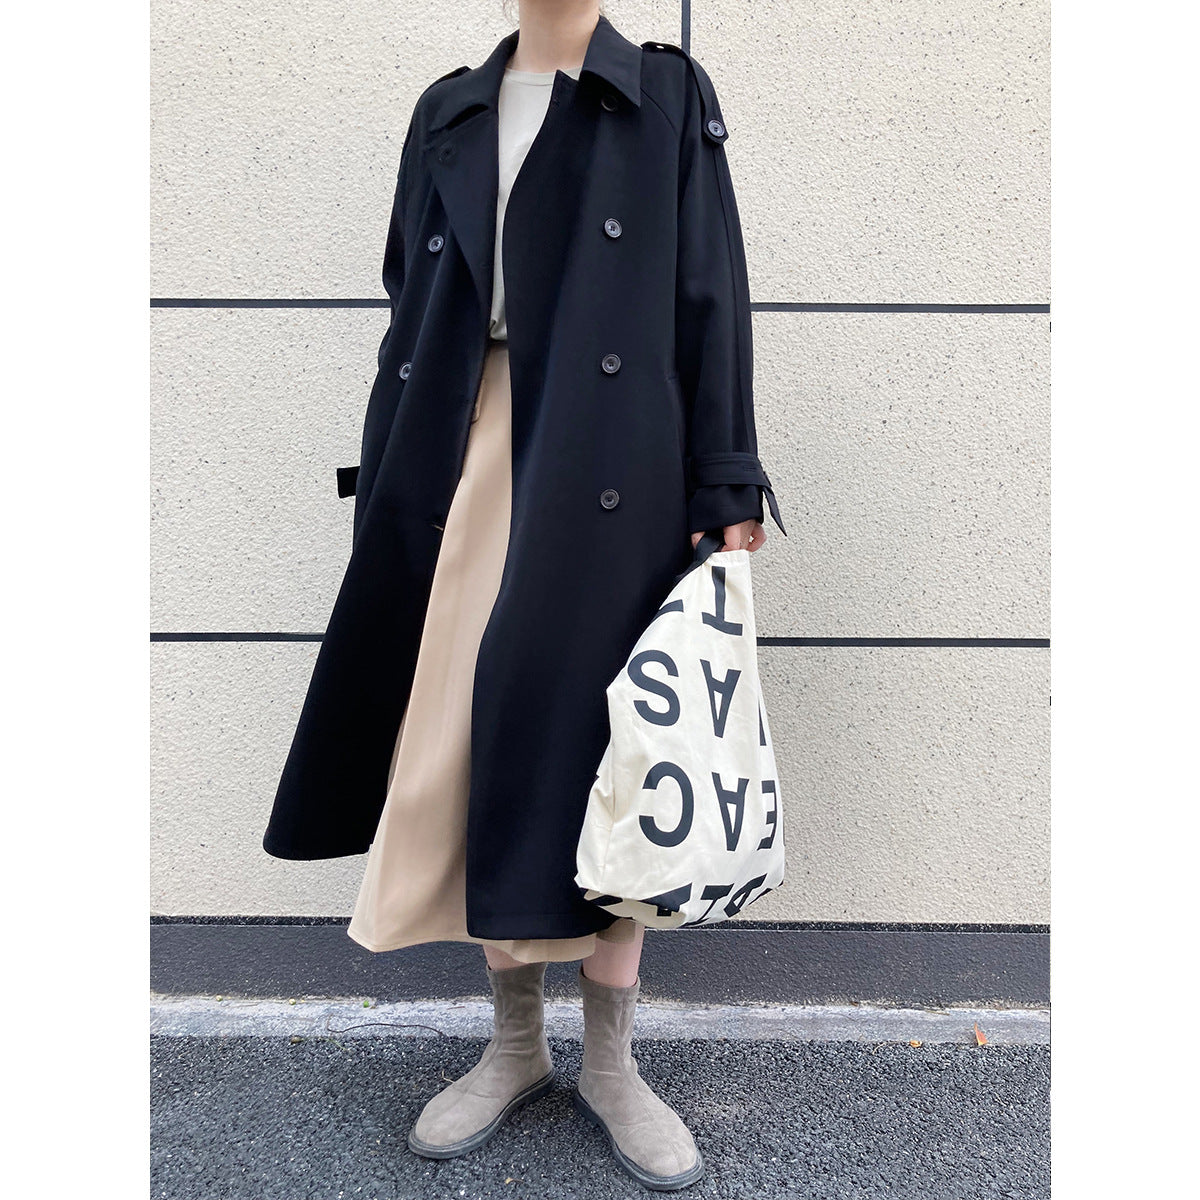 Fashion Fall Wind Break Long Overcoats for Women-Outerwear-Black-S-Free Shipping at meselling99